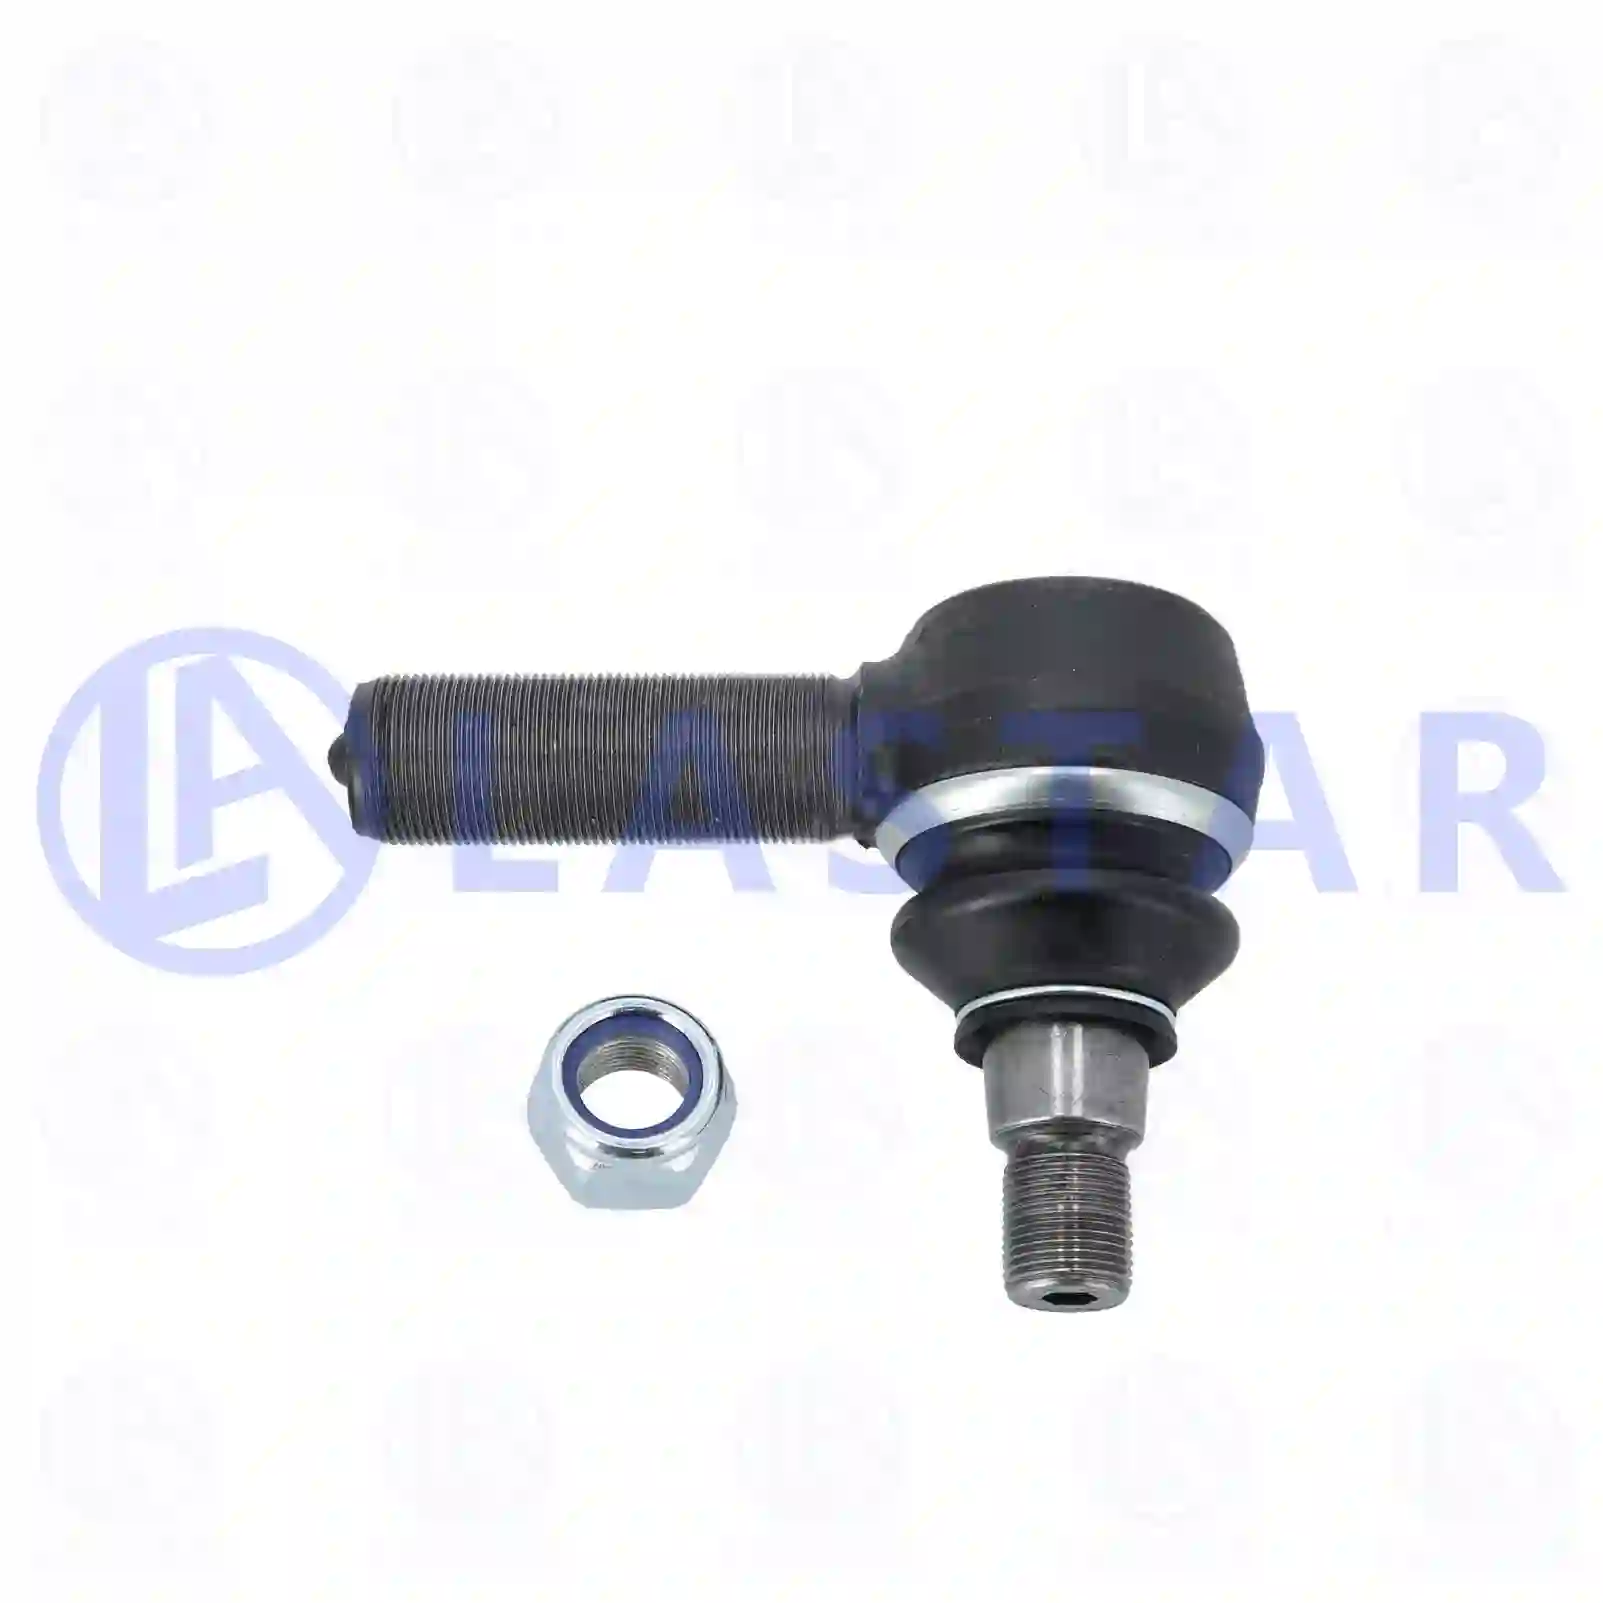 Ball joint, right hand thread, 77705419, 0014608248, , ||  77705419 Lastar Spare Part | Truck Spare Parts, Auotomotive Spare Parts Ball joint, right hand thread, 77705419, 0014608248, , ||  77705419 Lastar Spare Part | Truck Spare Parts, Auotomotive Spare Parts